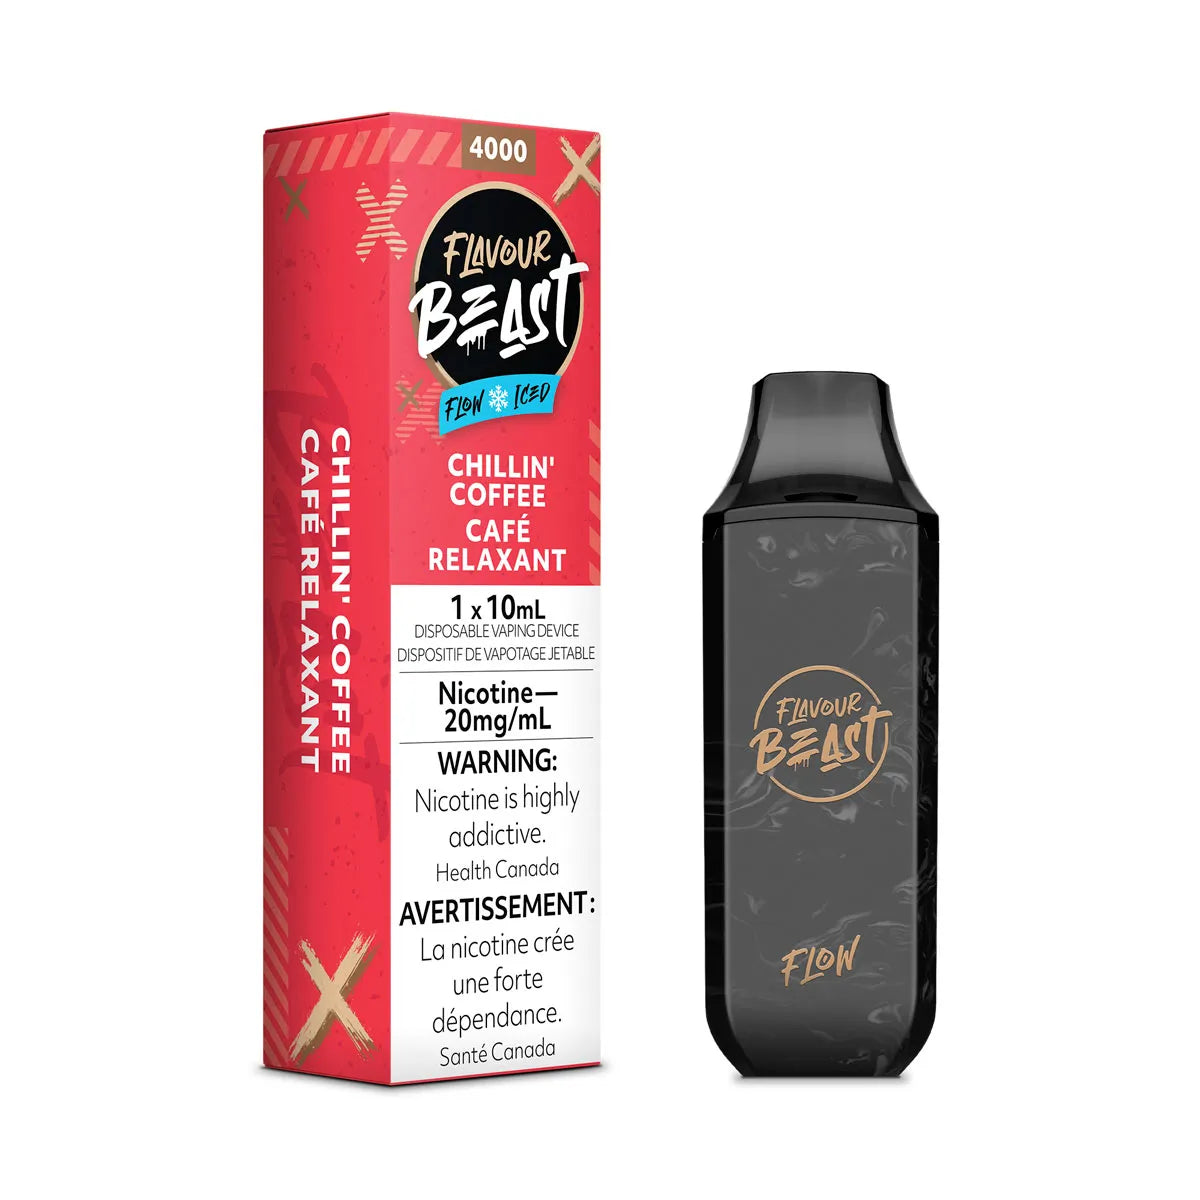 FLAVOUR BEAST CHILLIN' COFFEE ICED FLOW DISPOSABLE